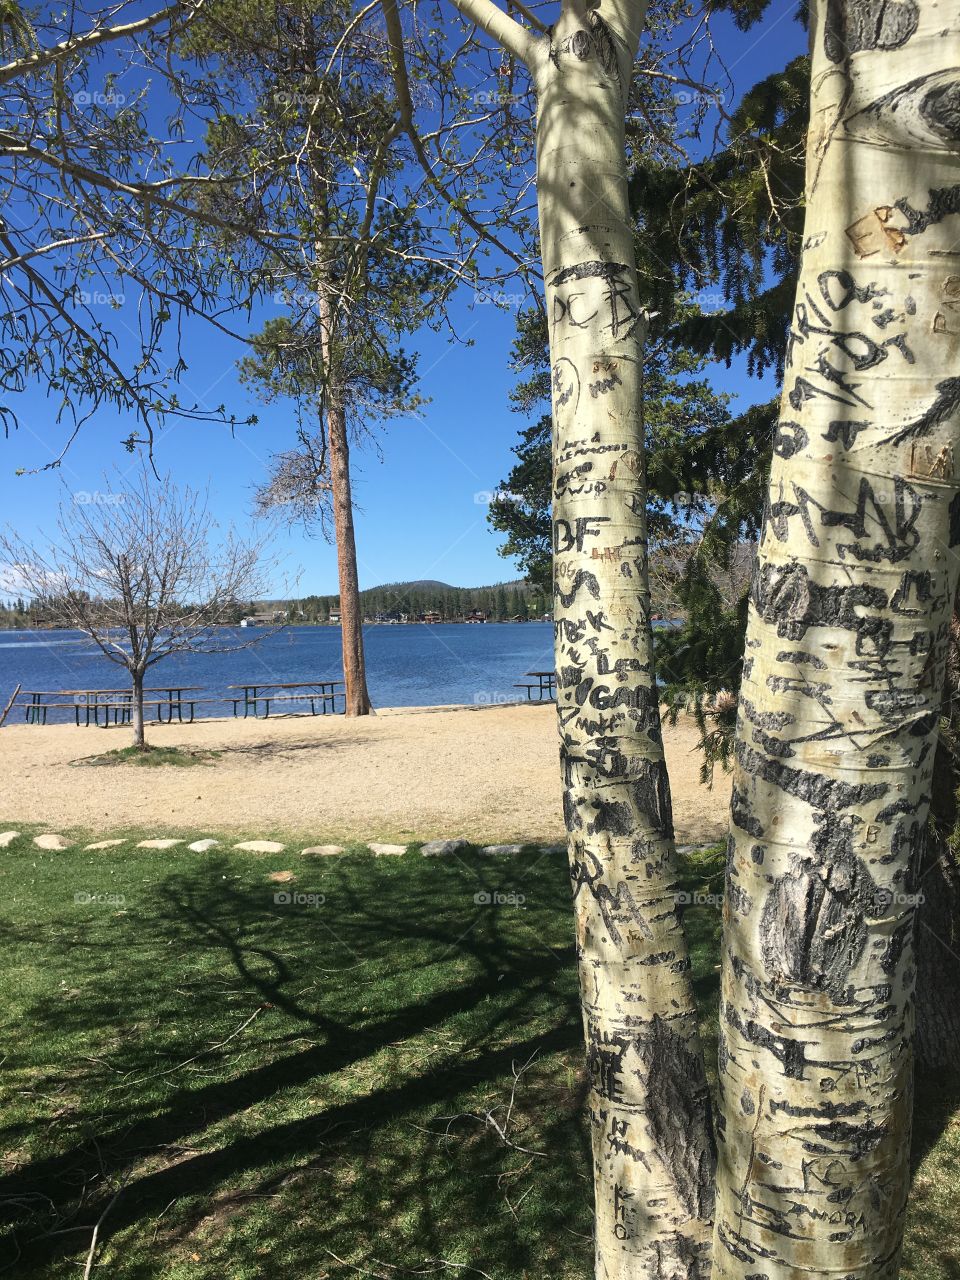 Lovers Aspen- this tree grows on the shore of Grand Lake and clearly has seen visits from many a pocket knife.